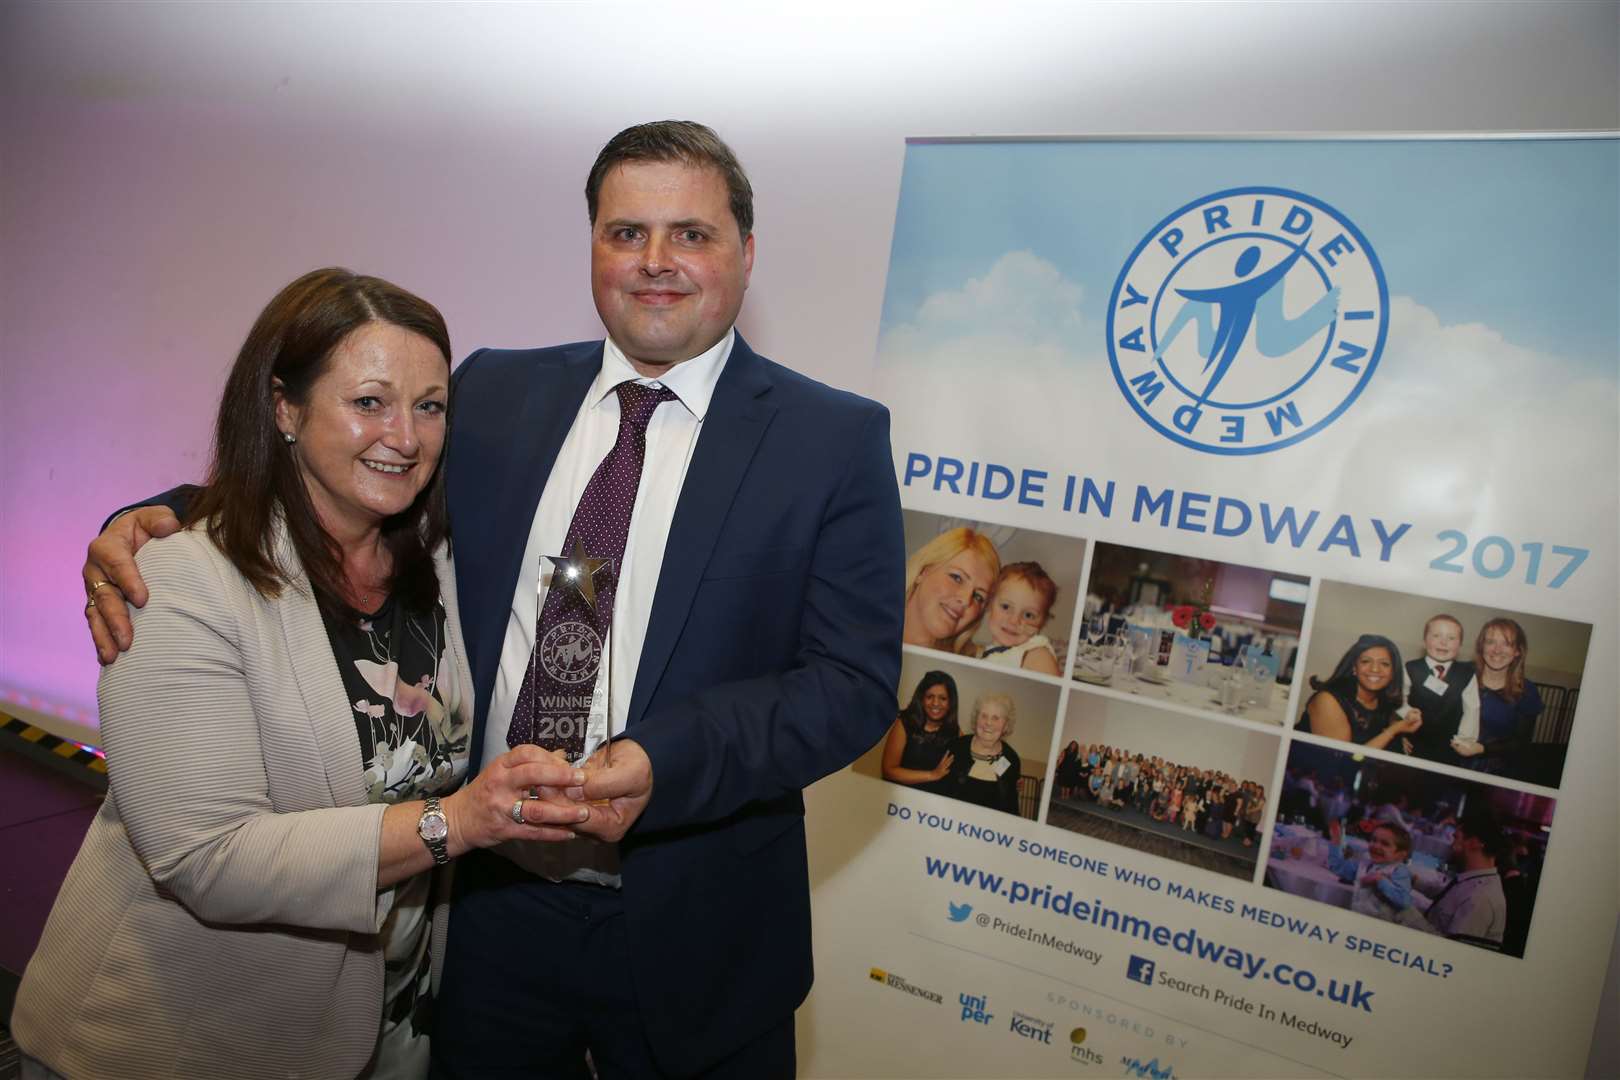 Pride in Medway winners in 2017 Liz and Darren Shaw from One Big Family Helping the Homeless Picture: Andy Jones